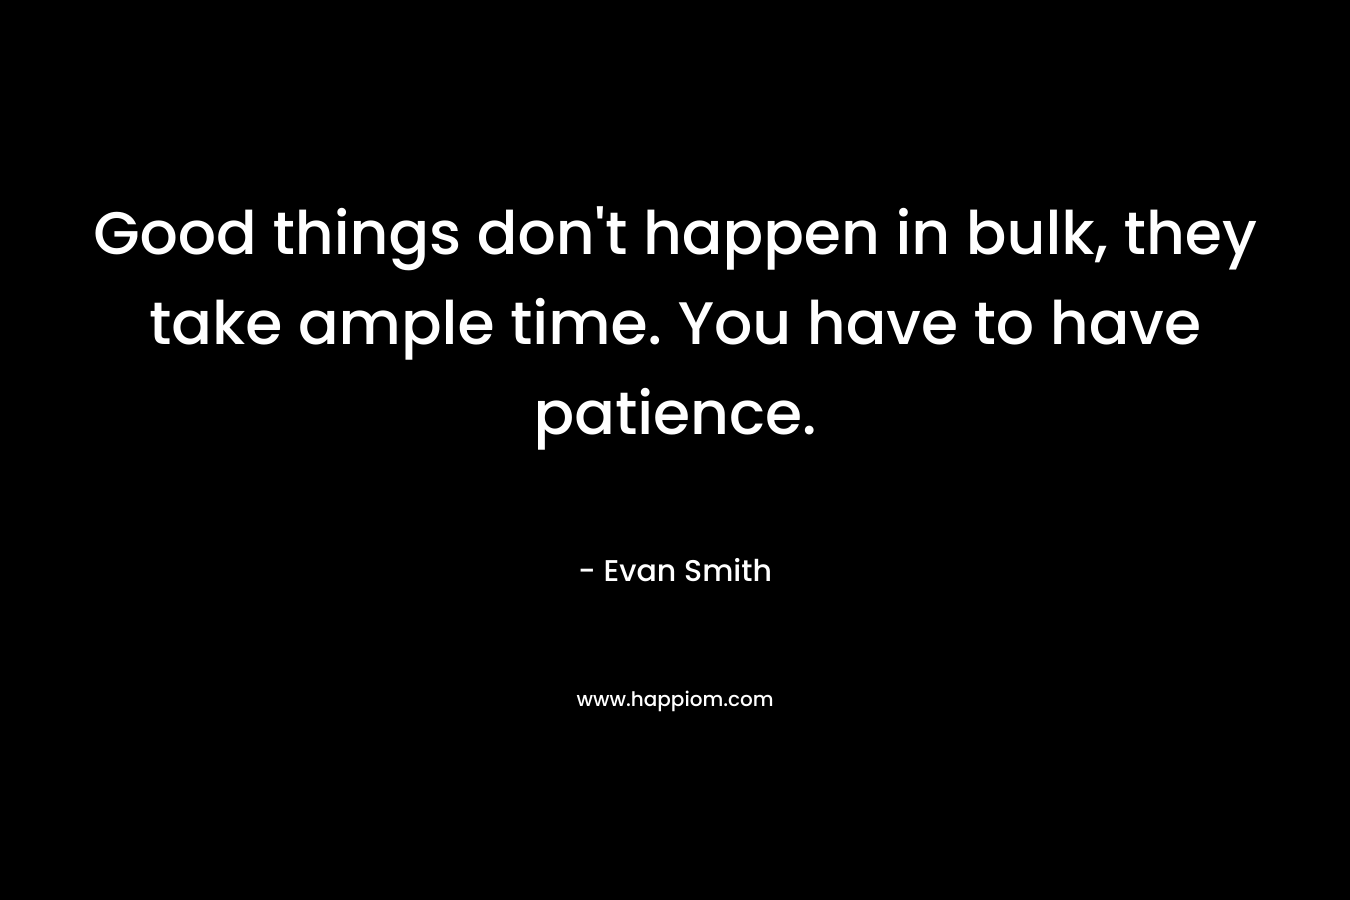 Good things don't happen in bulk, they take ample time. You have to have patience.